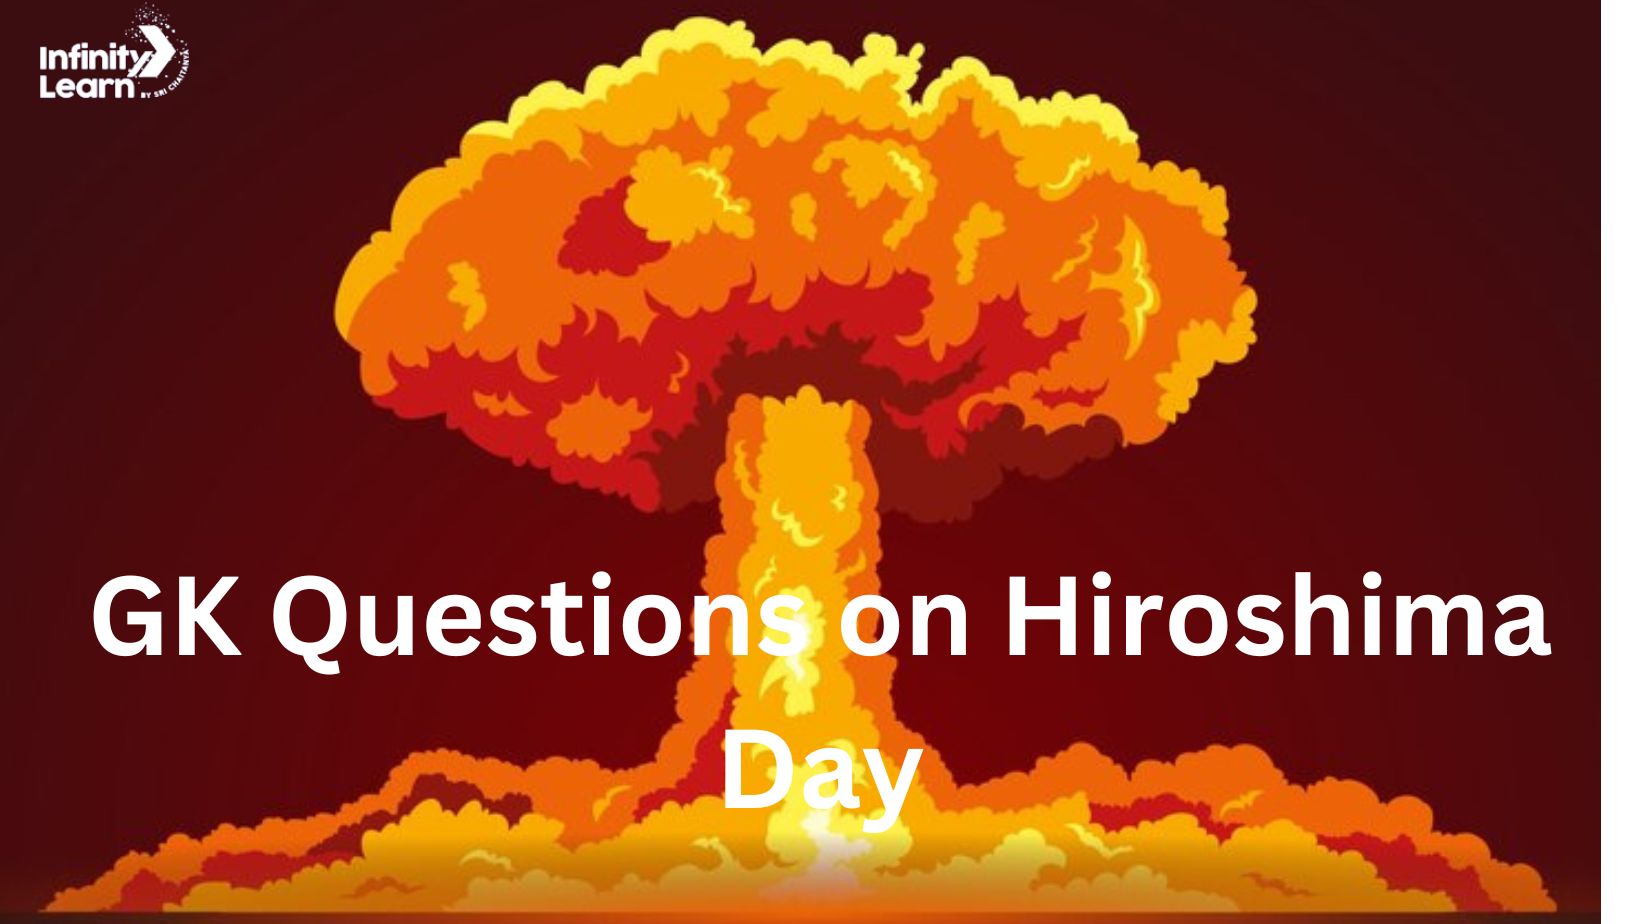 GK Questions on Hiroshima Day